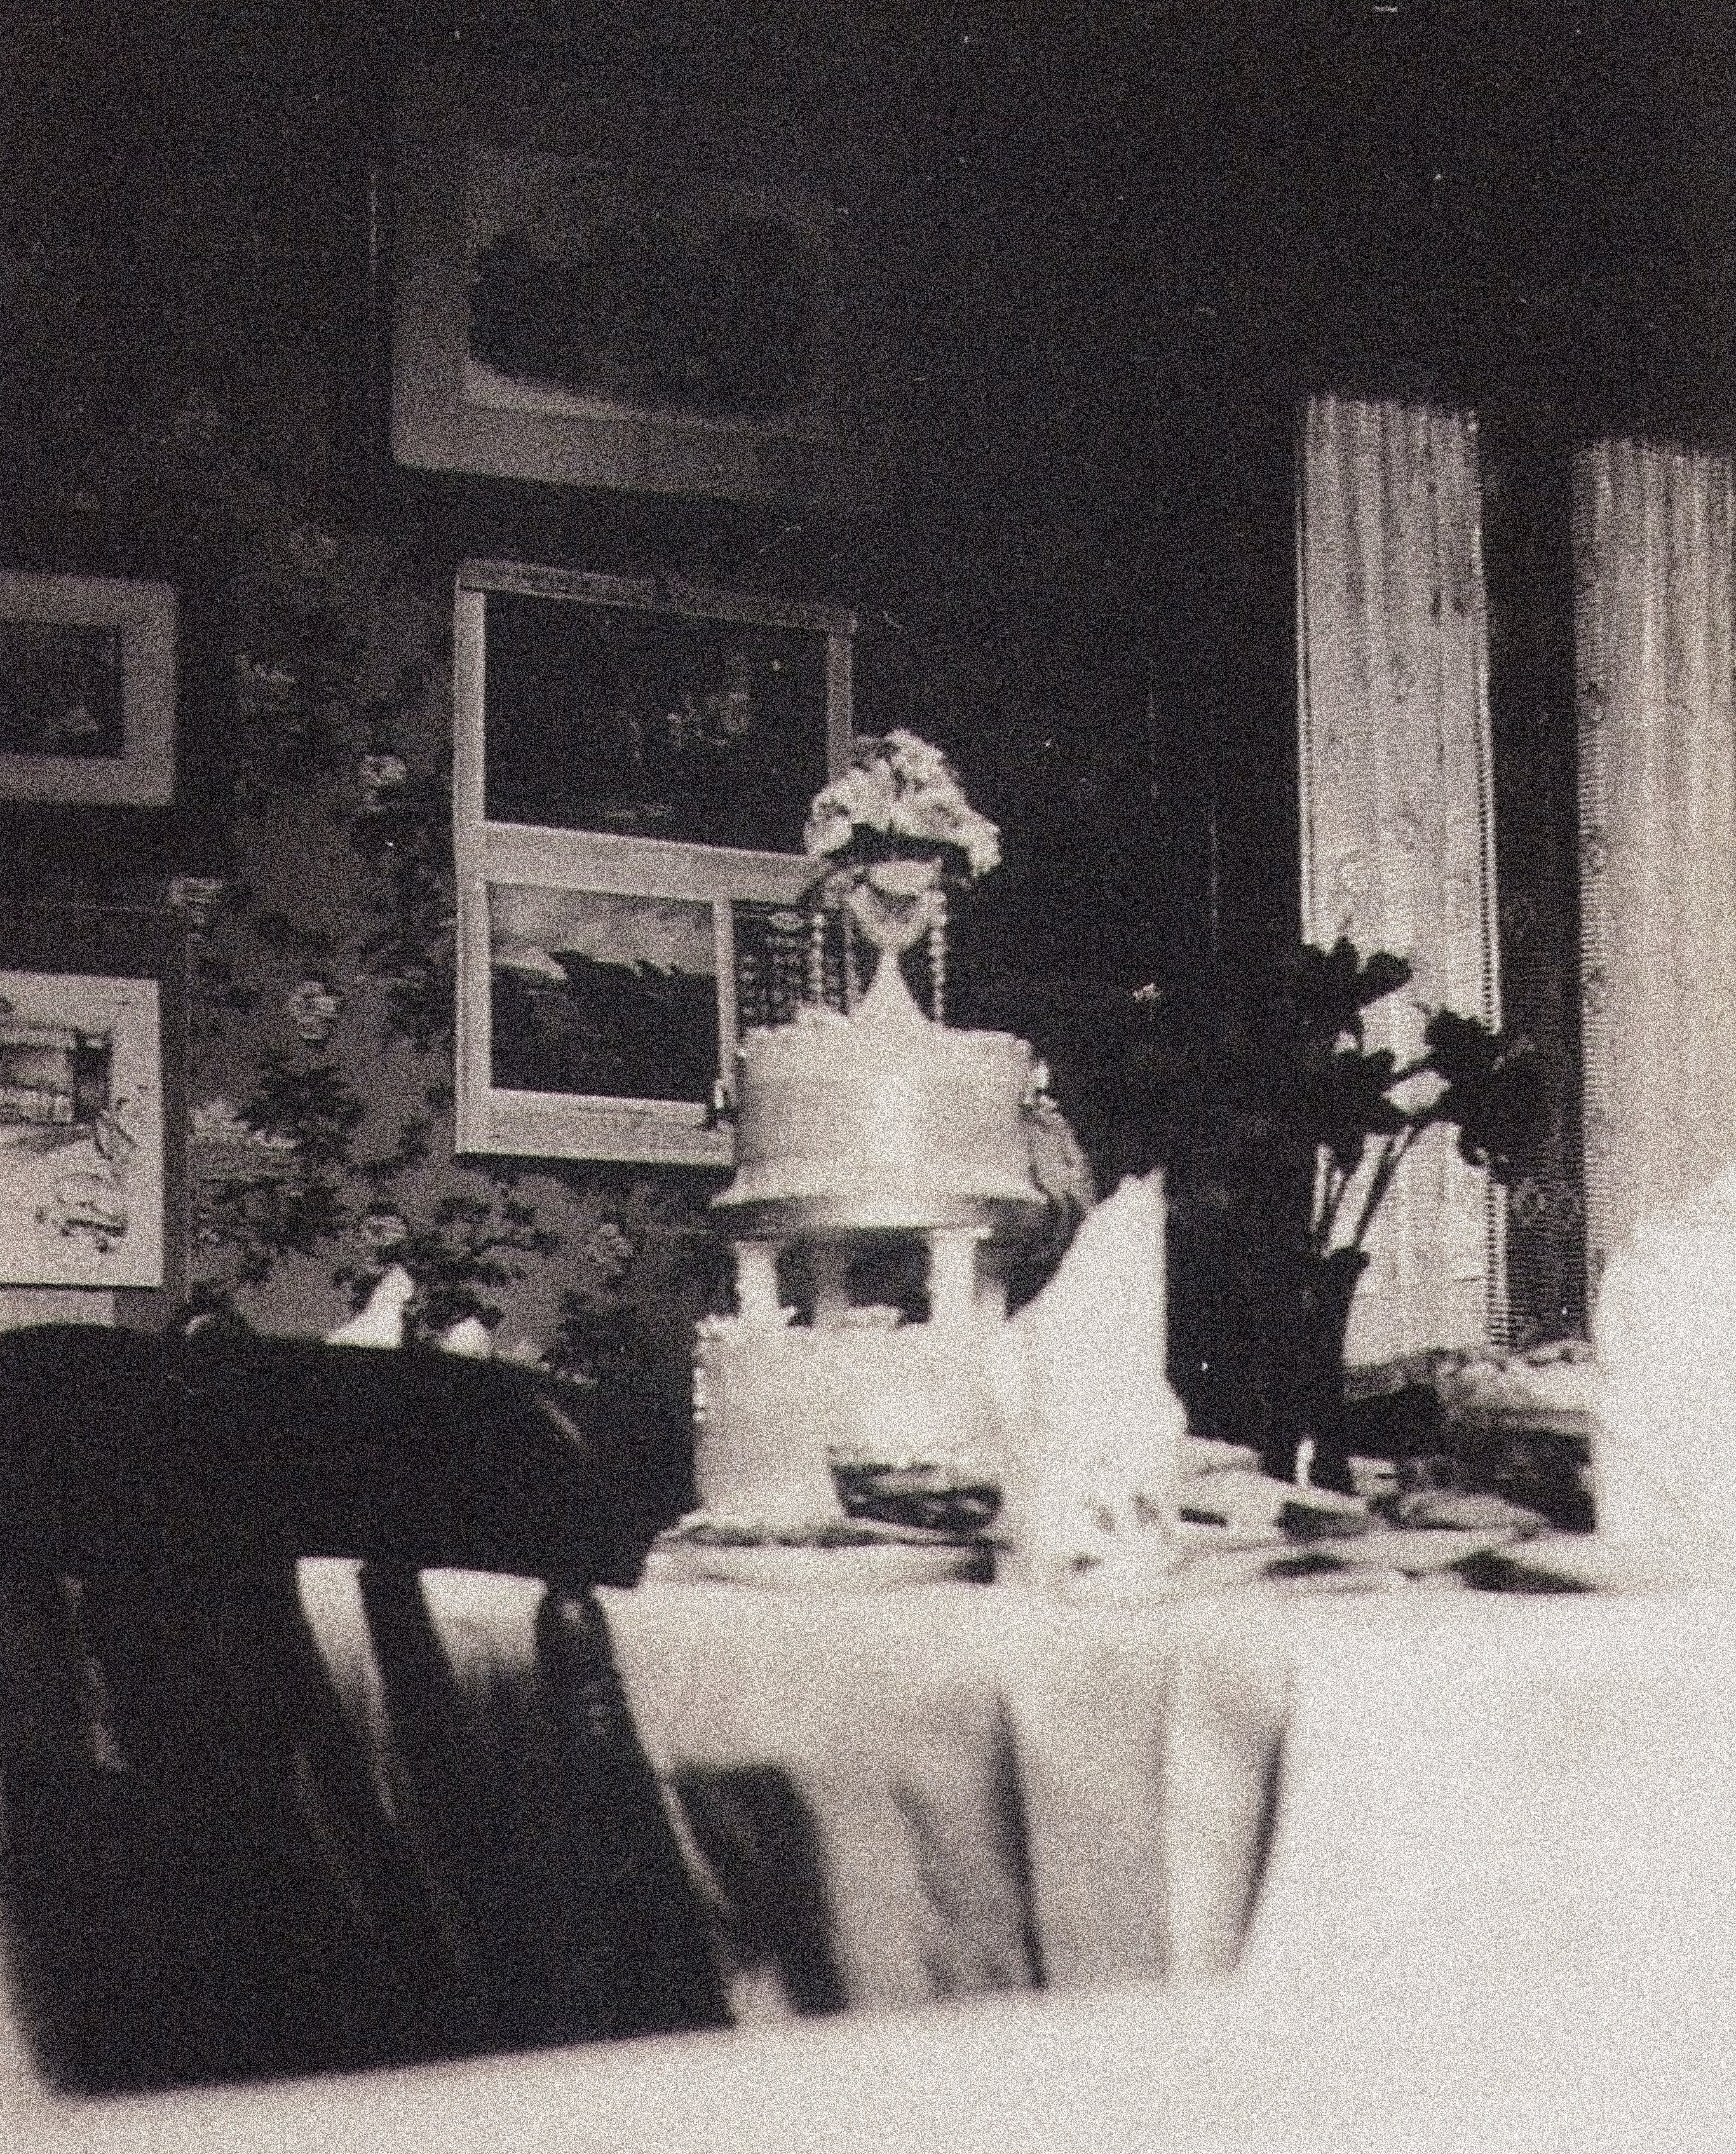 a vintage wedding cake on a table